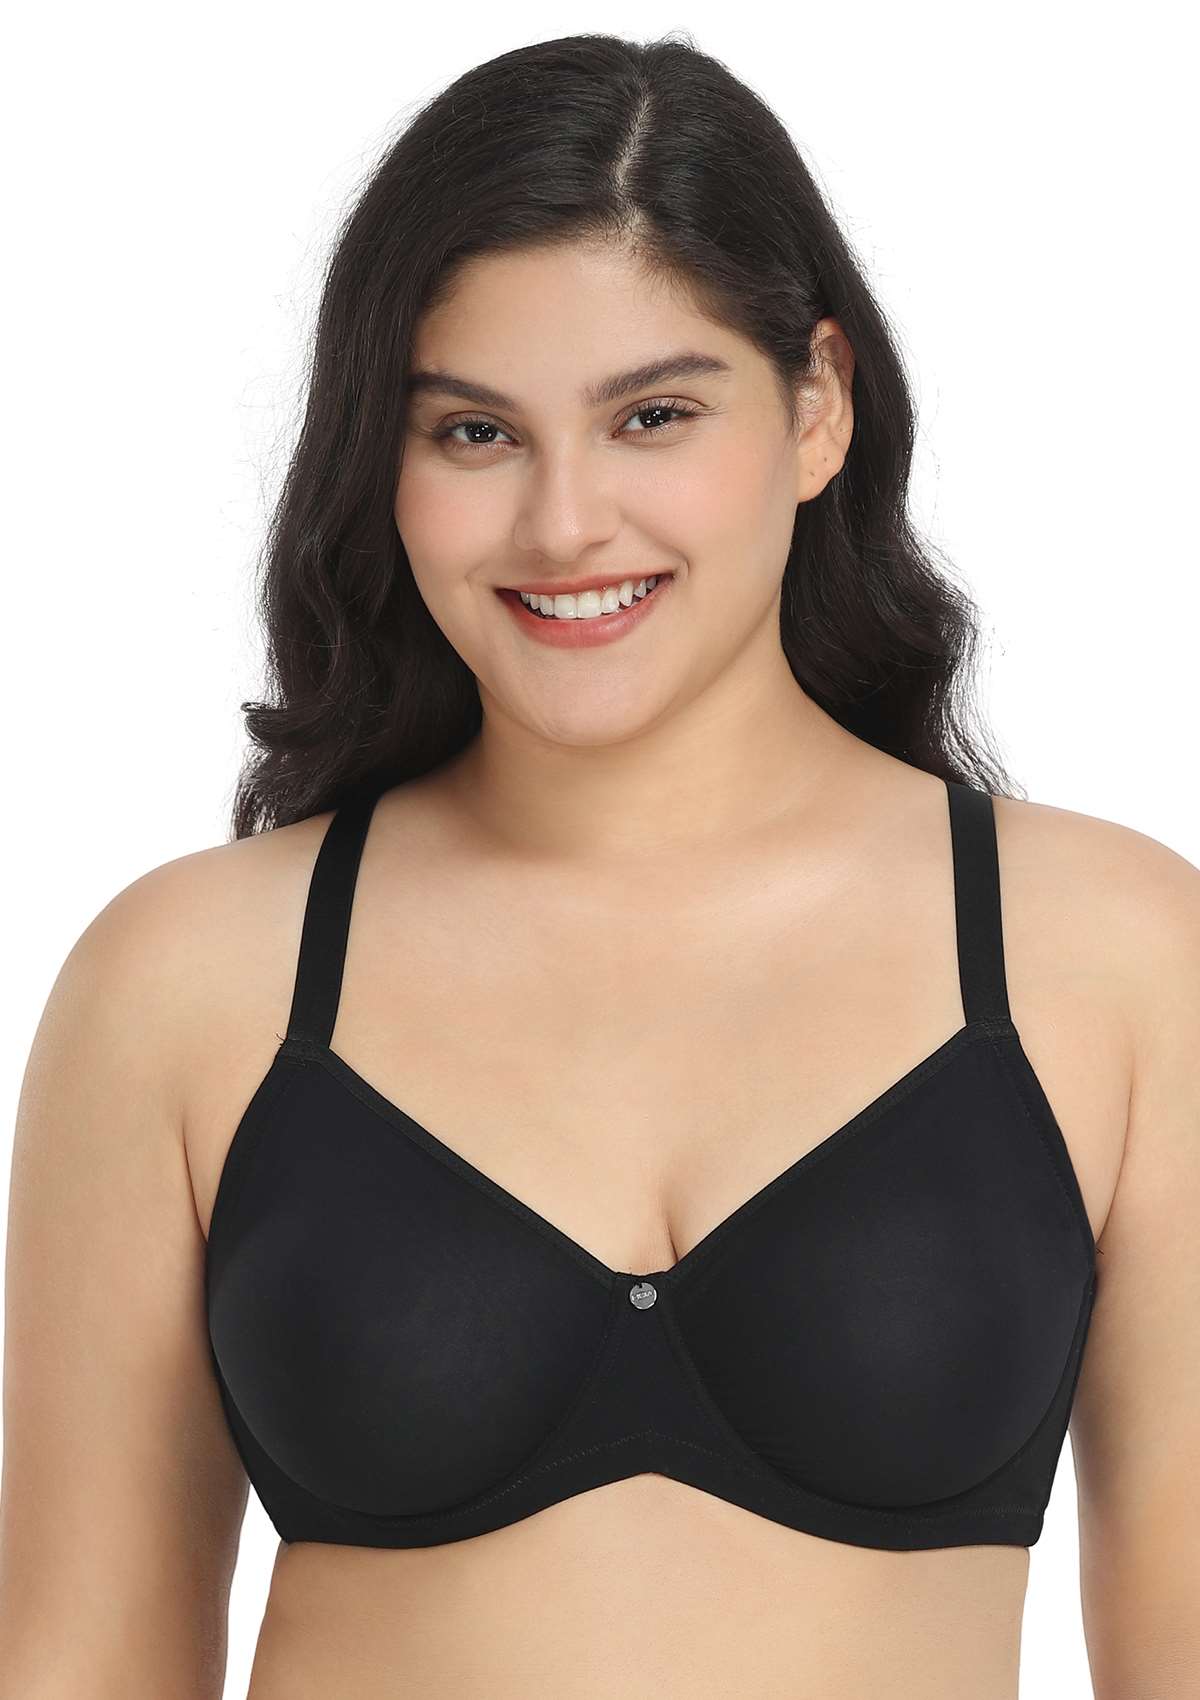 HSIA Marquita Ultimate Comfort Unlined Mesh Sheer Airy Underwire Bra - 34 / D / Black